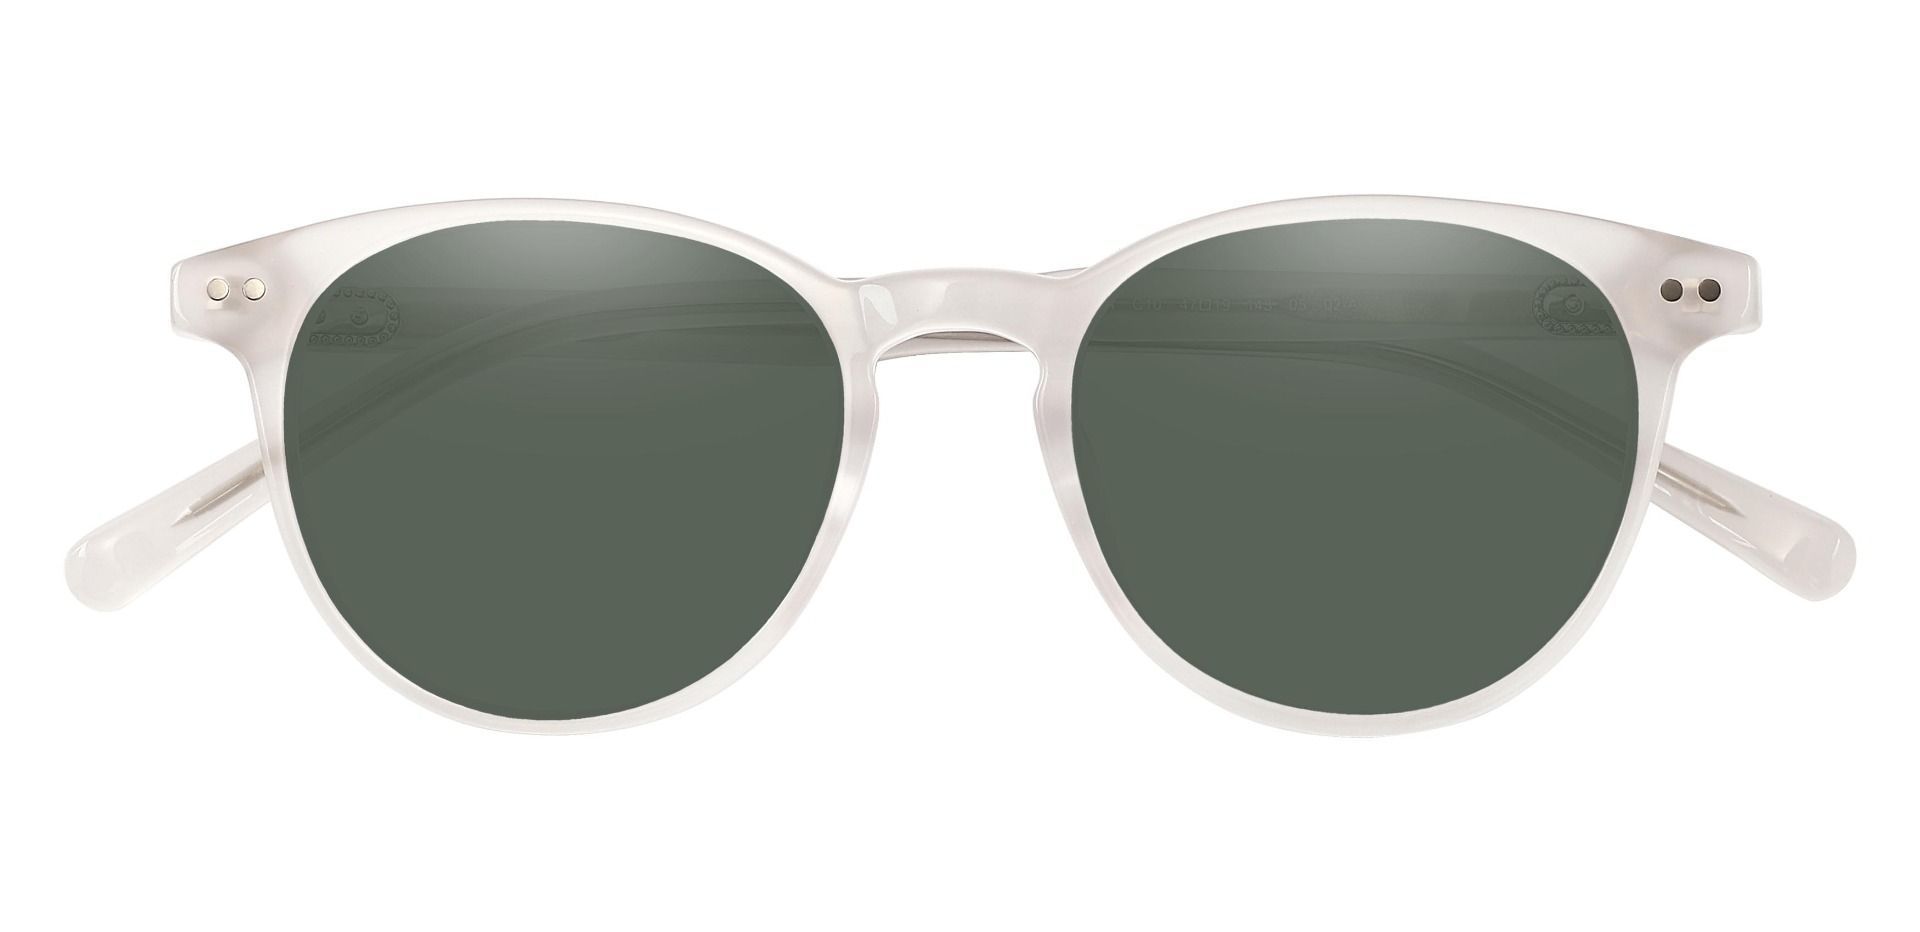 Marianna Oval Non-Rx Sunglasses - White Frame With Green Lenses